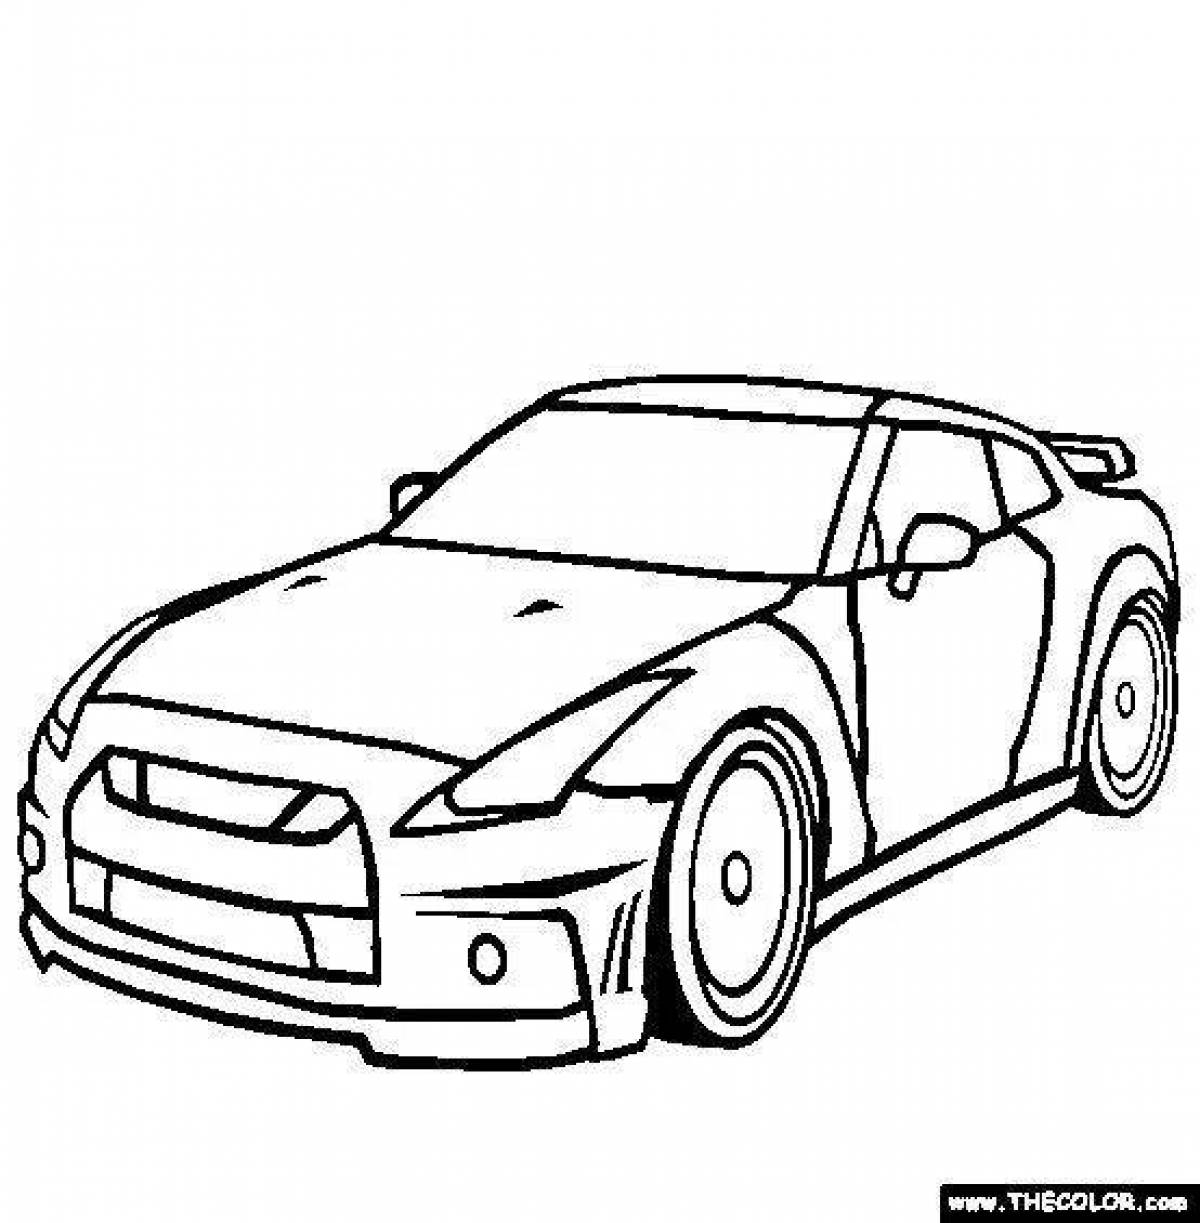 Dazzling gtr coloring page